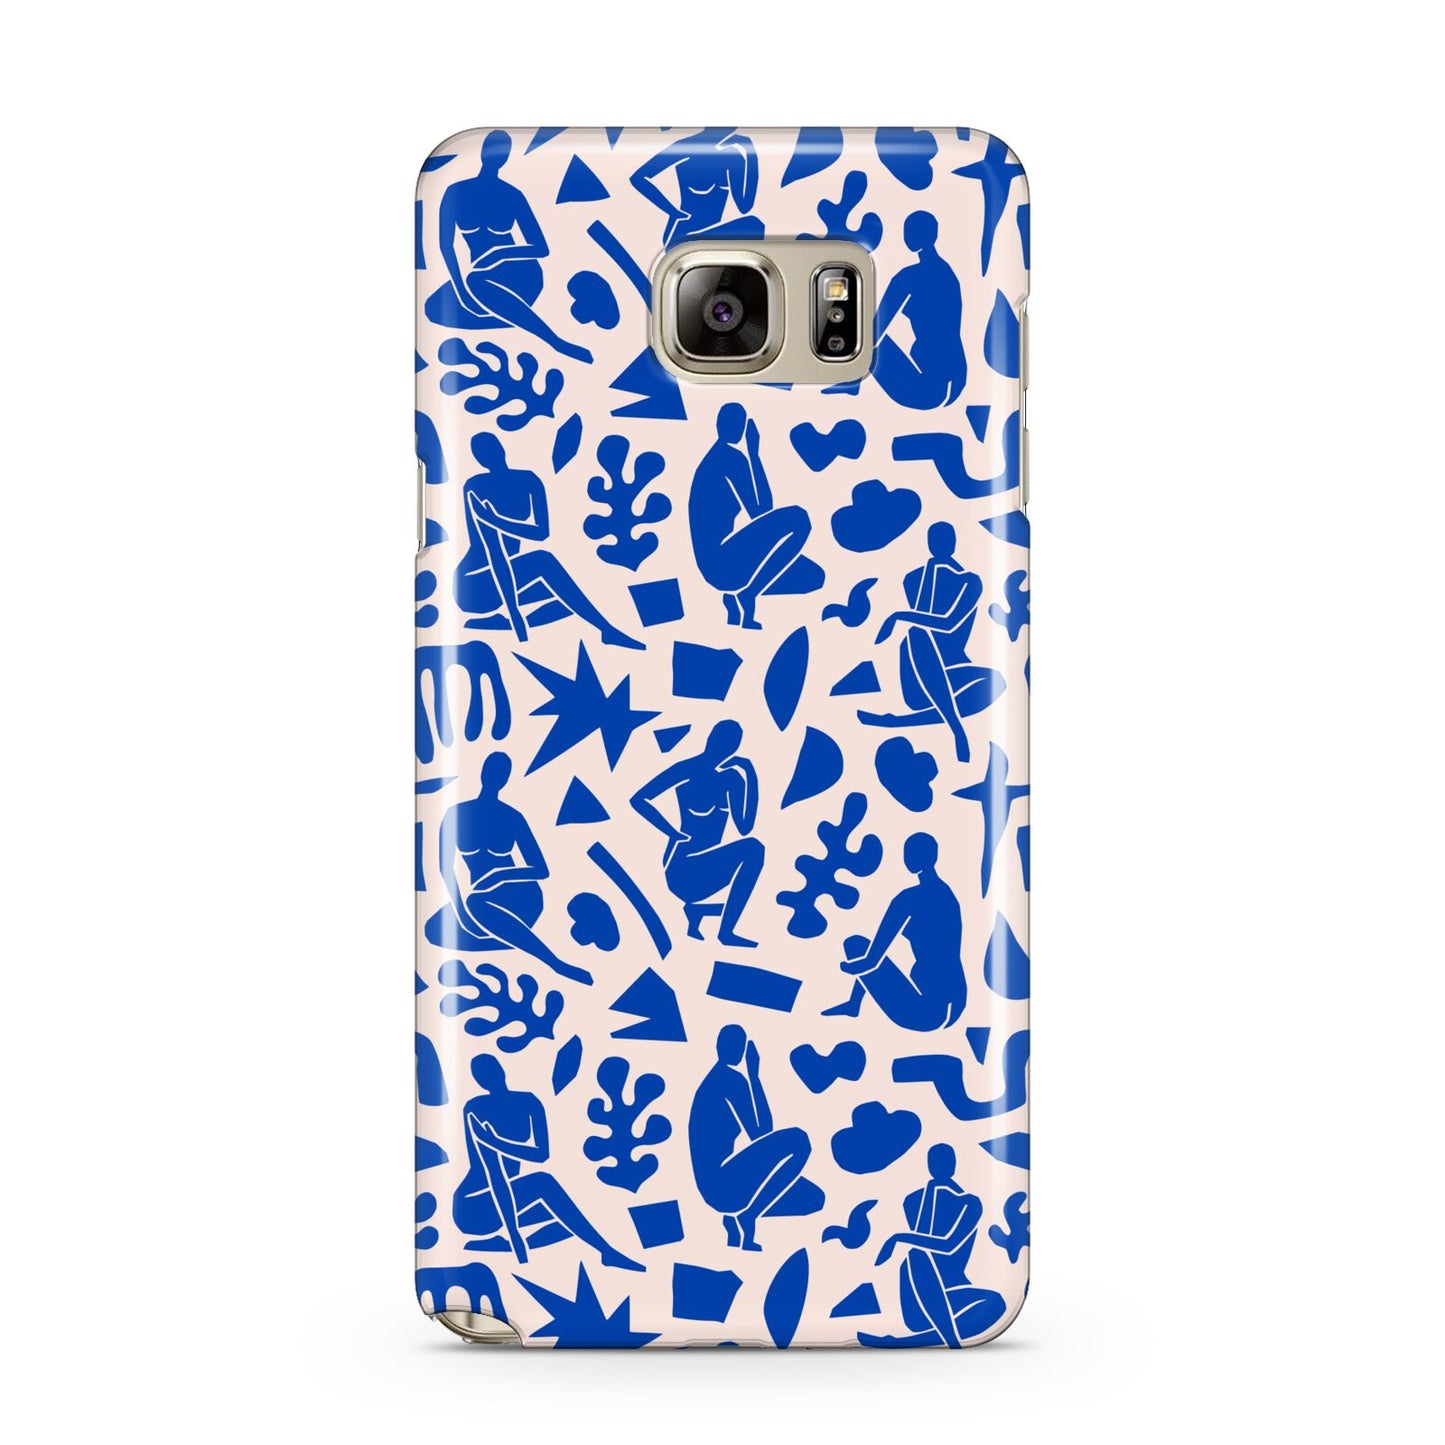 Abstract Art Samsung Galaxy Note 5 Case